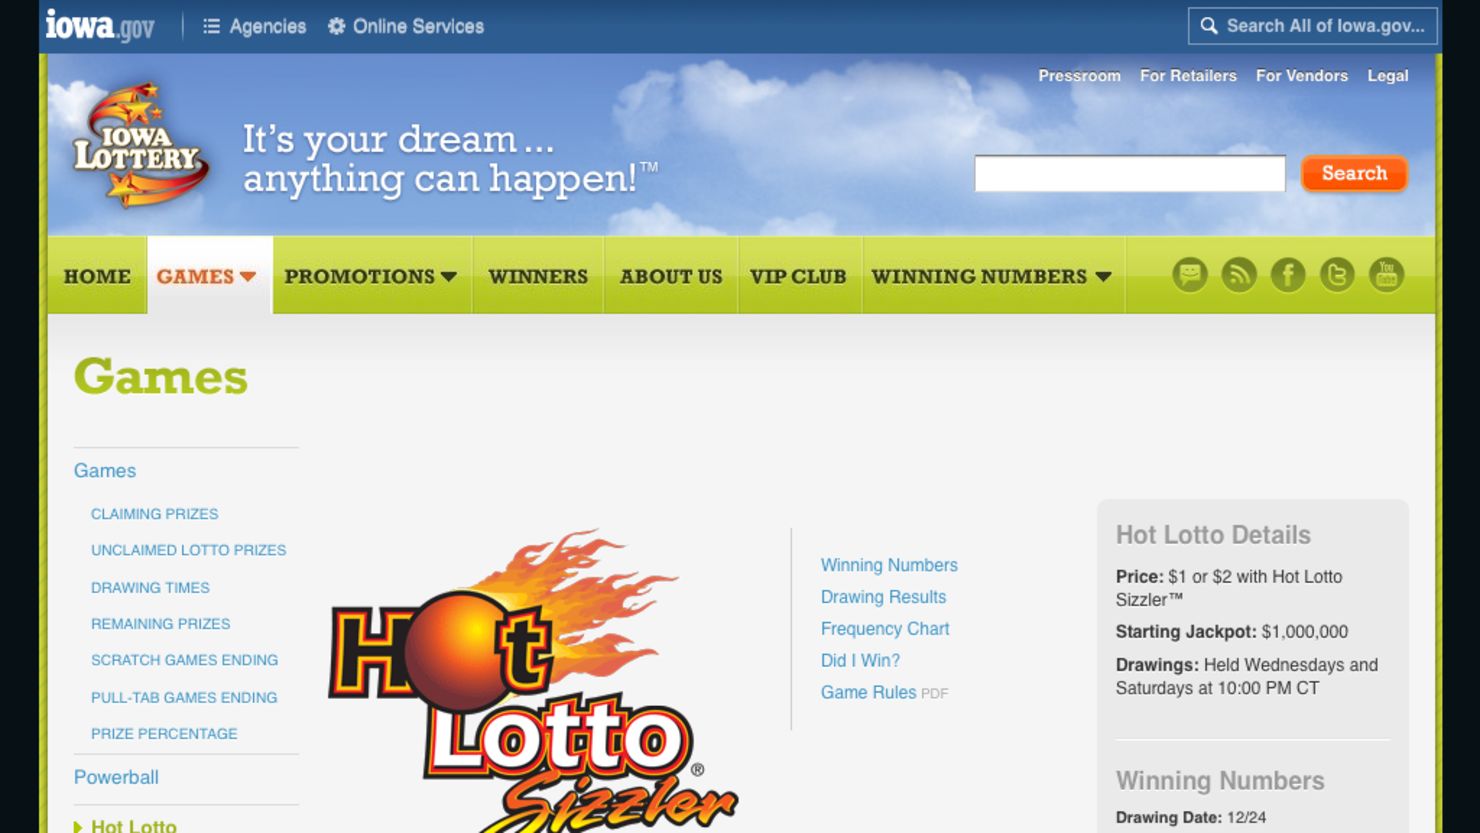 The Iowa Lottery is seeking the winner of a $10.75 million Hot Lotto jackpot who has until 4 p.m. Thursday to claim it.